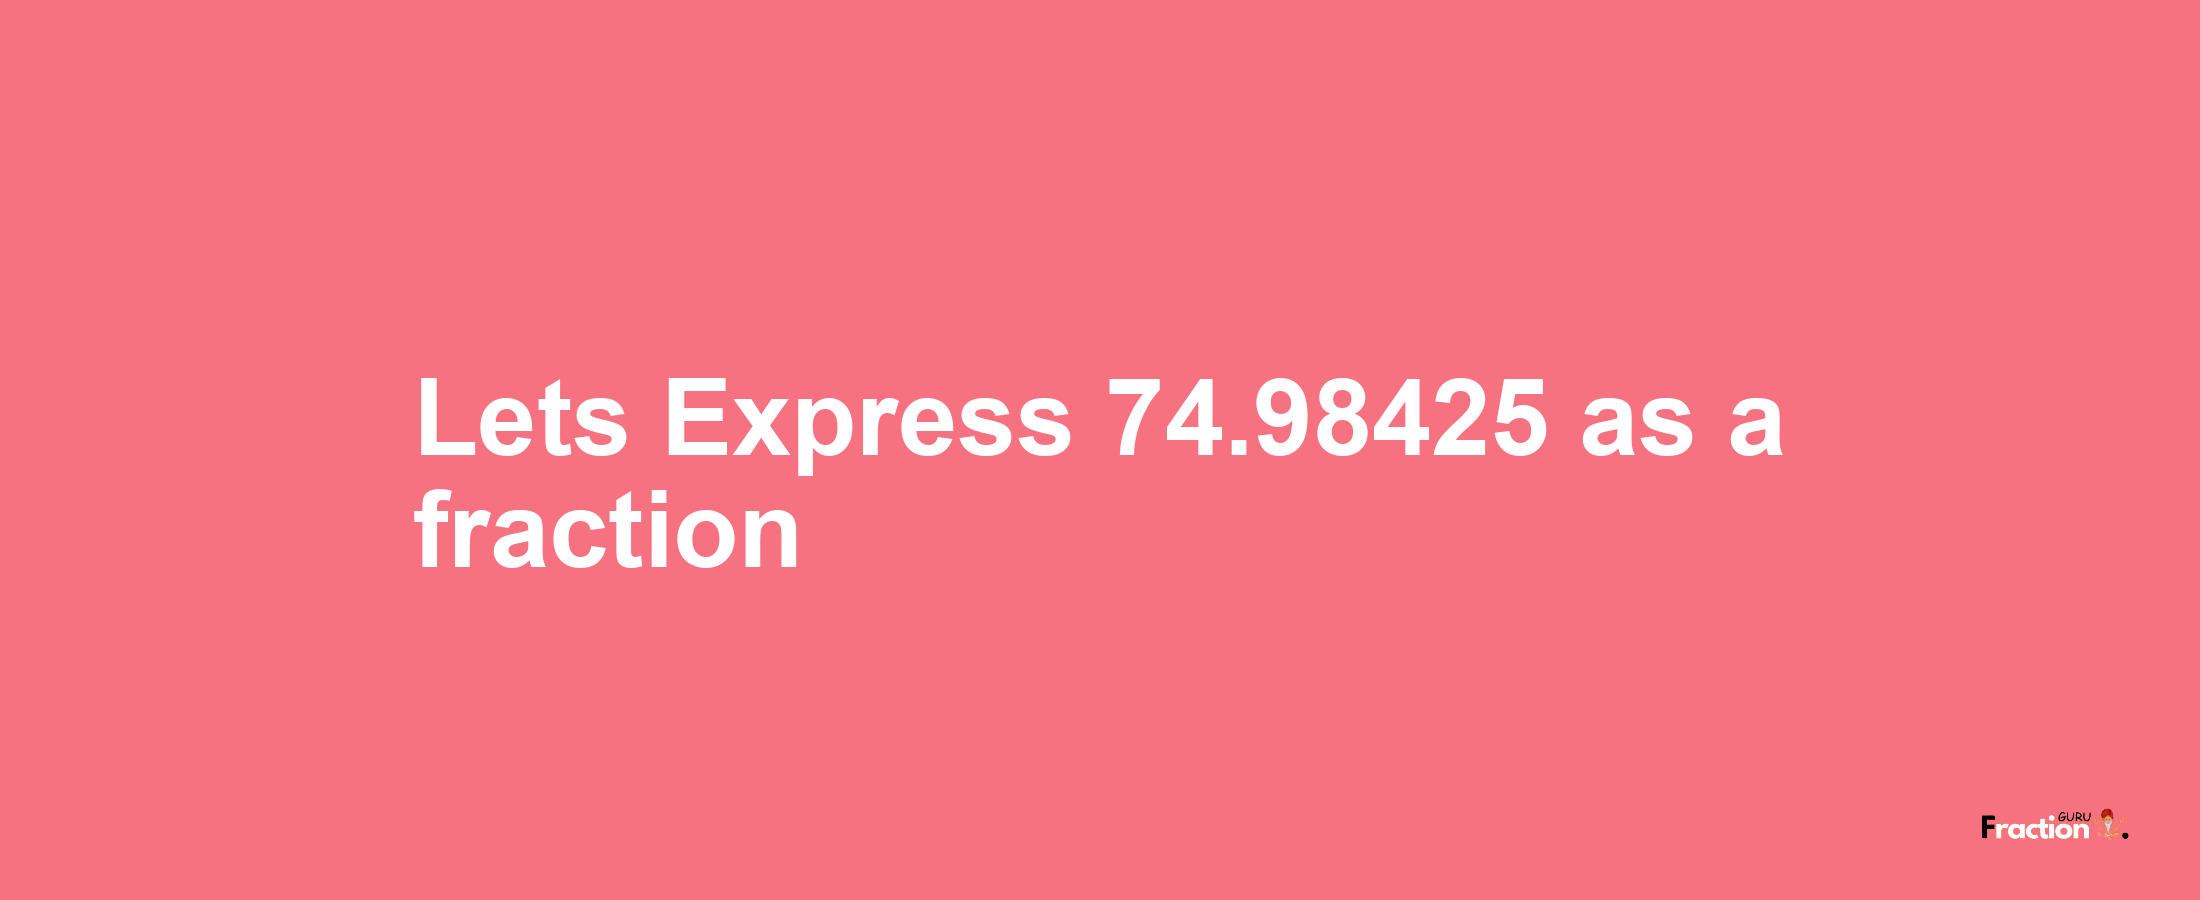 Lets Express 74.98425 as afraction